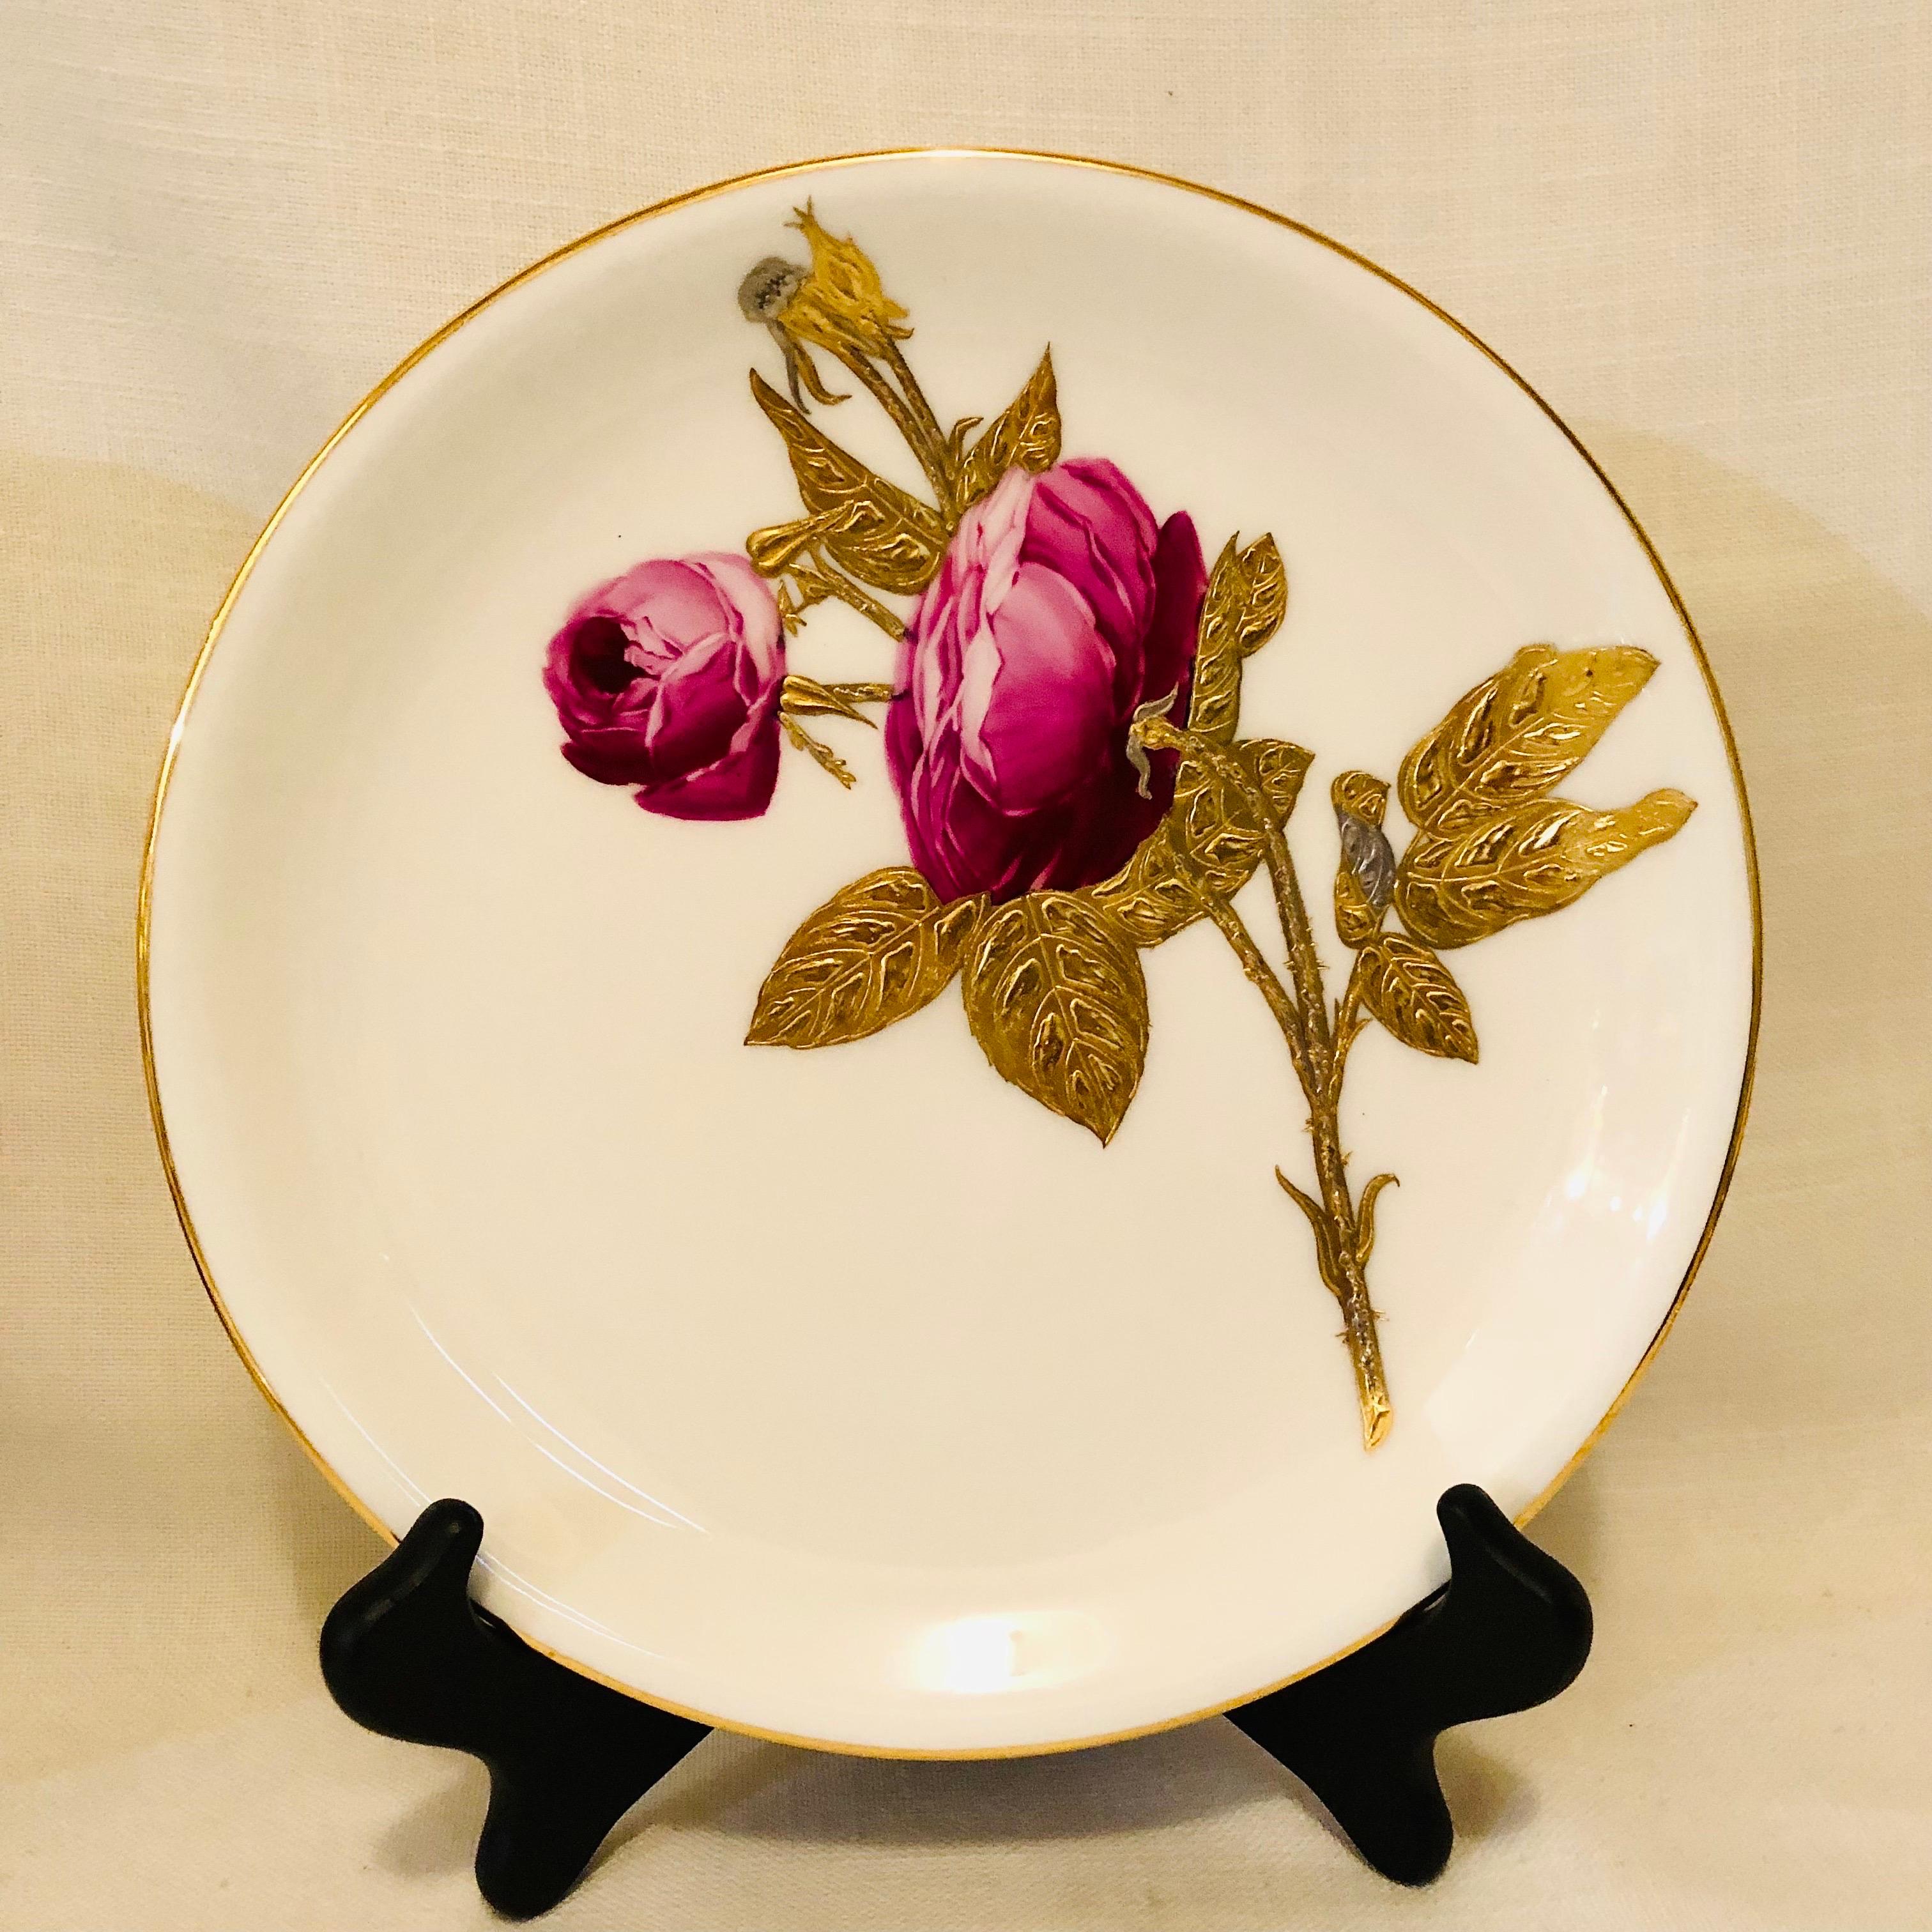 Minton Plates Each Painted With a Different Rose With Gold and Platinum Accents 2